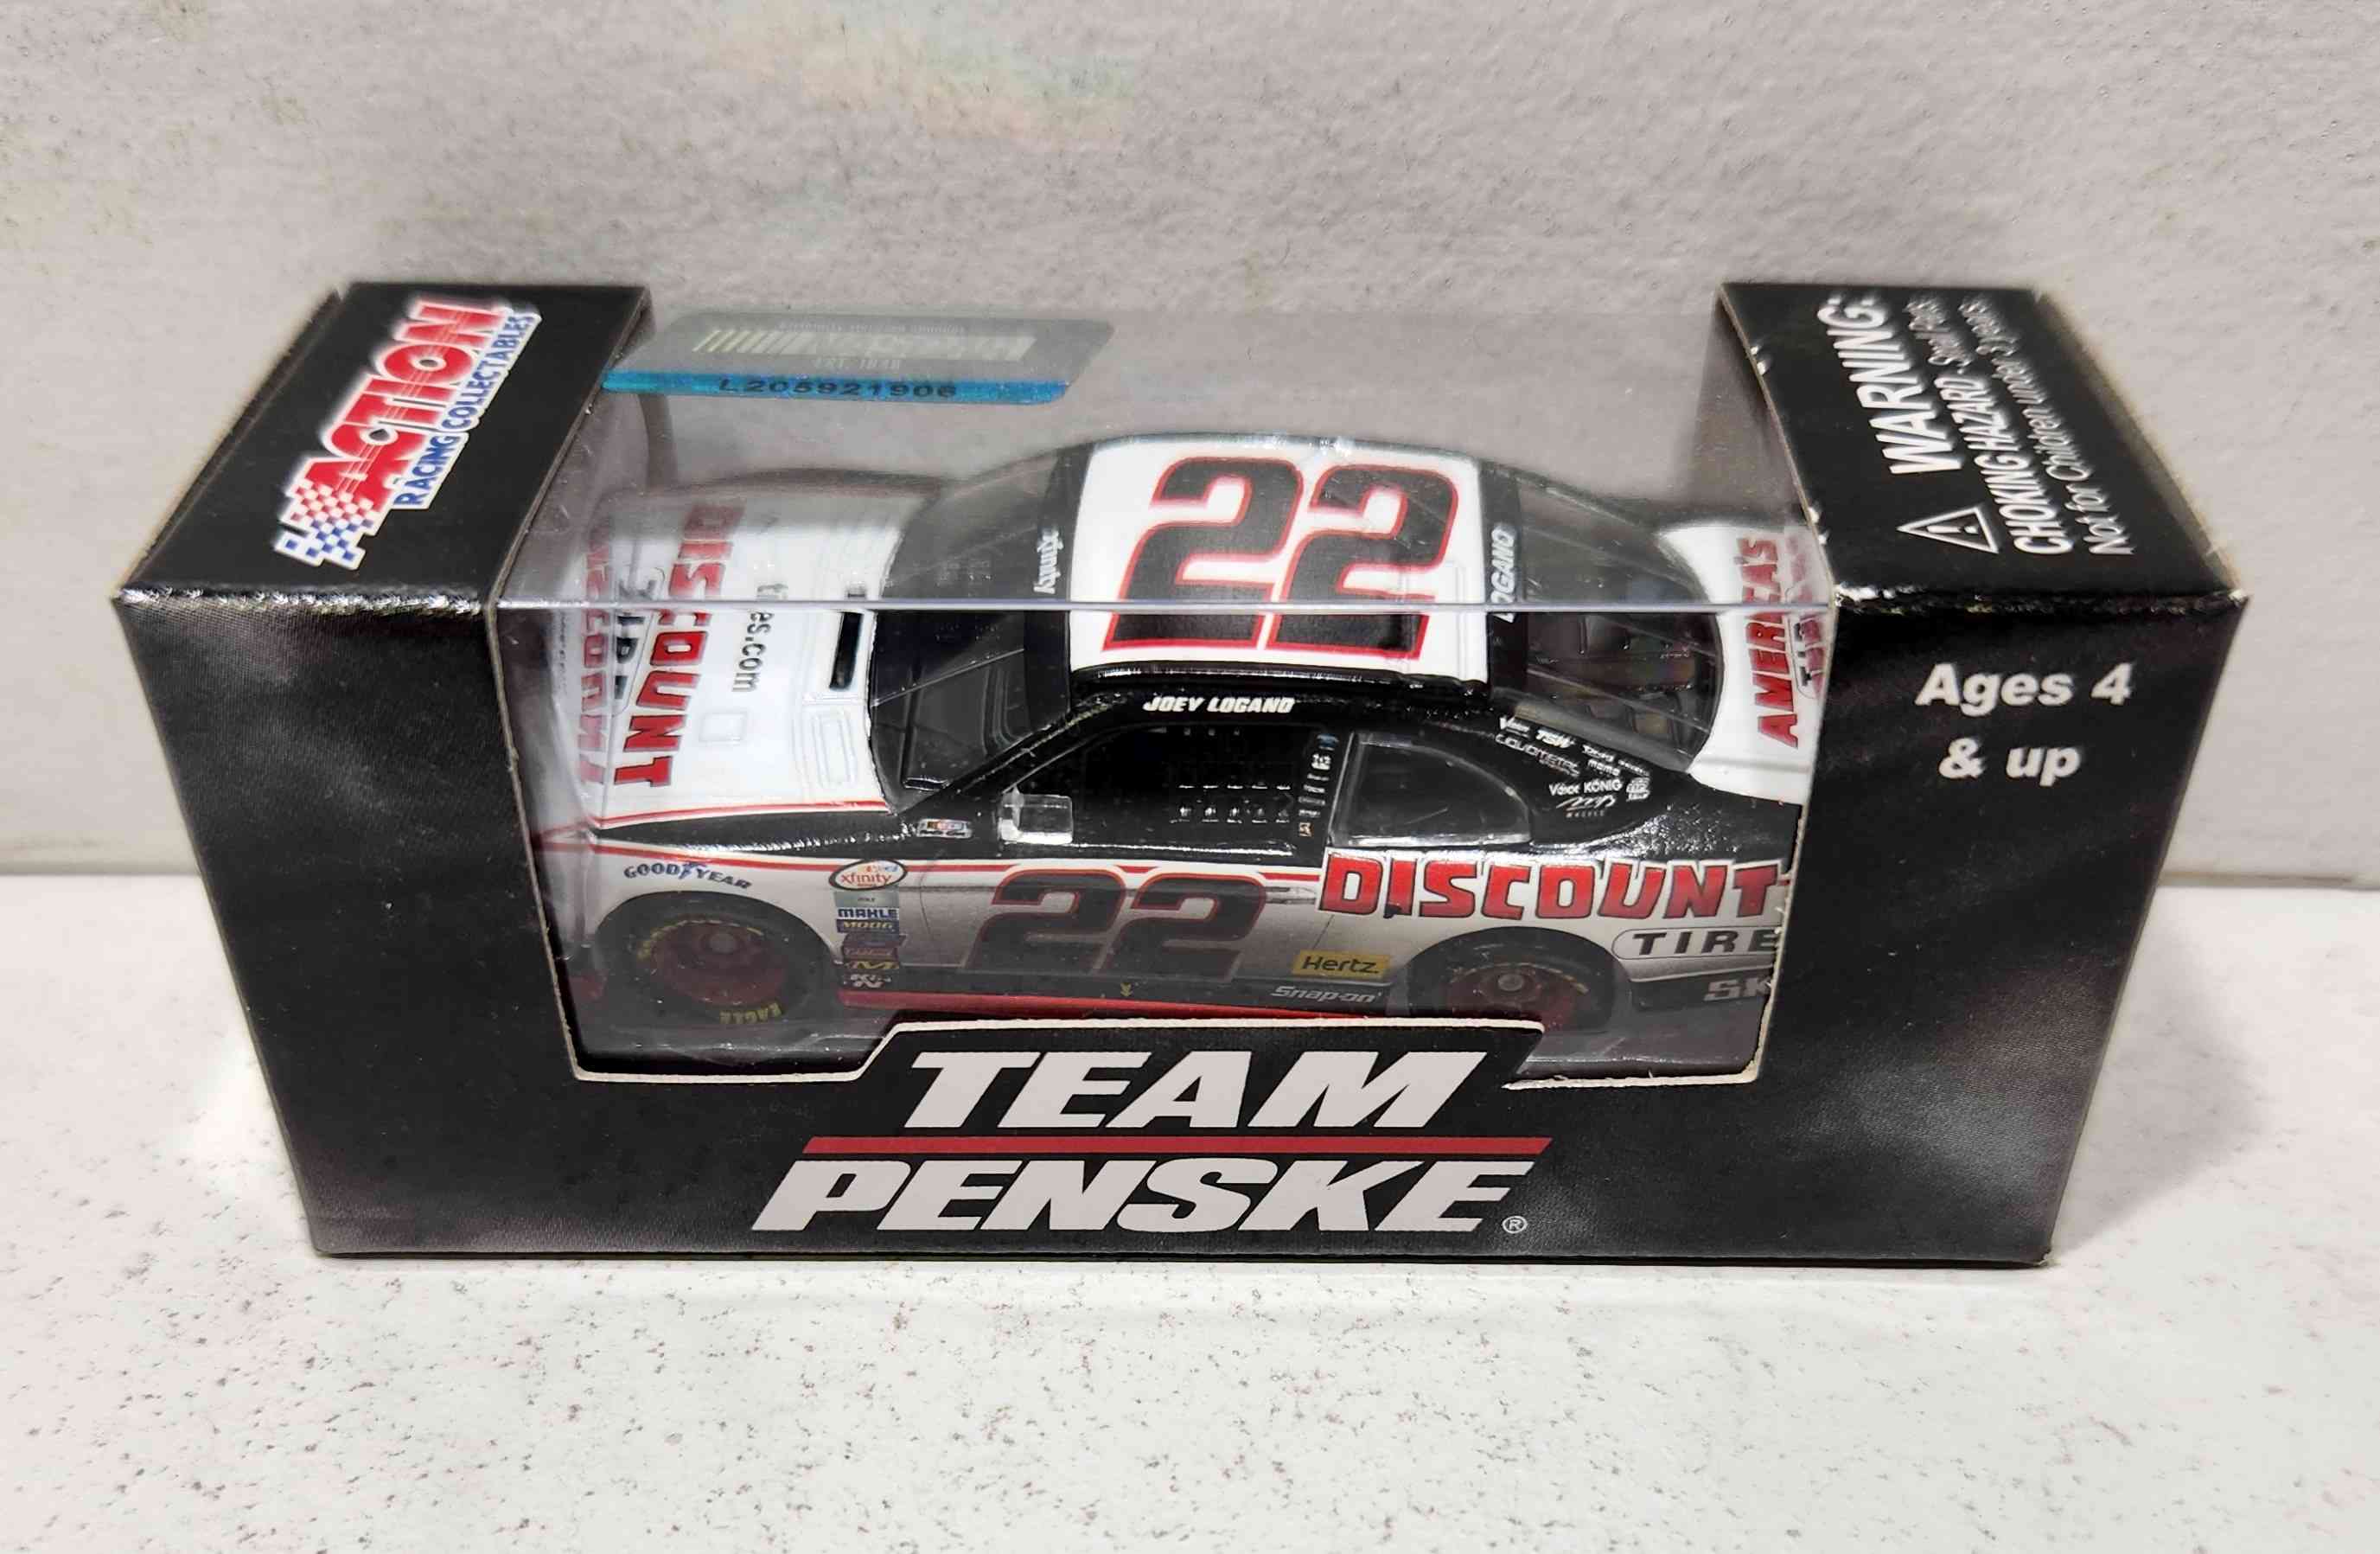 2015 Joey Logano 1/64th Discount Tire "Xfinity Series" Pitstop Series Mustang